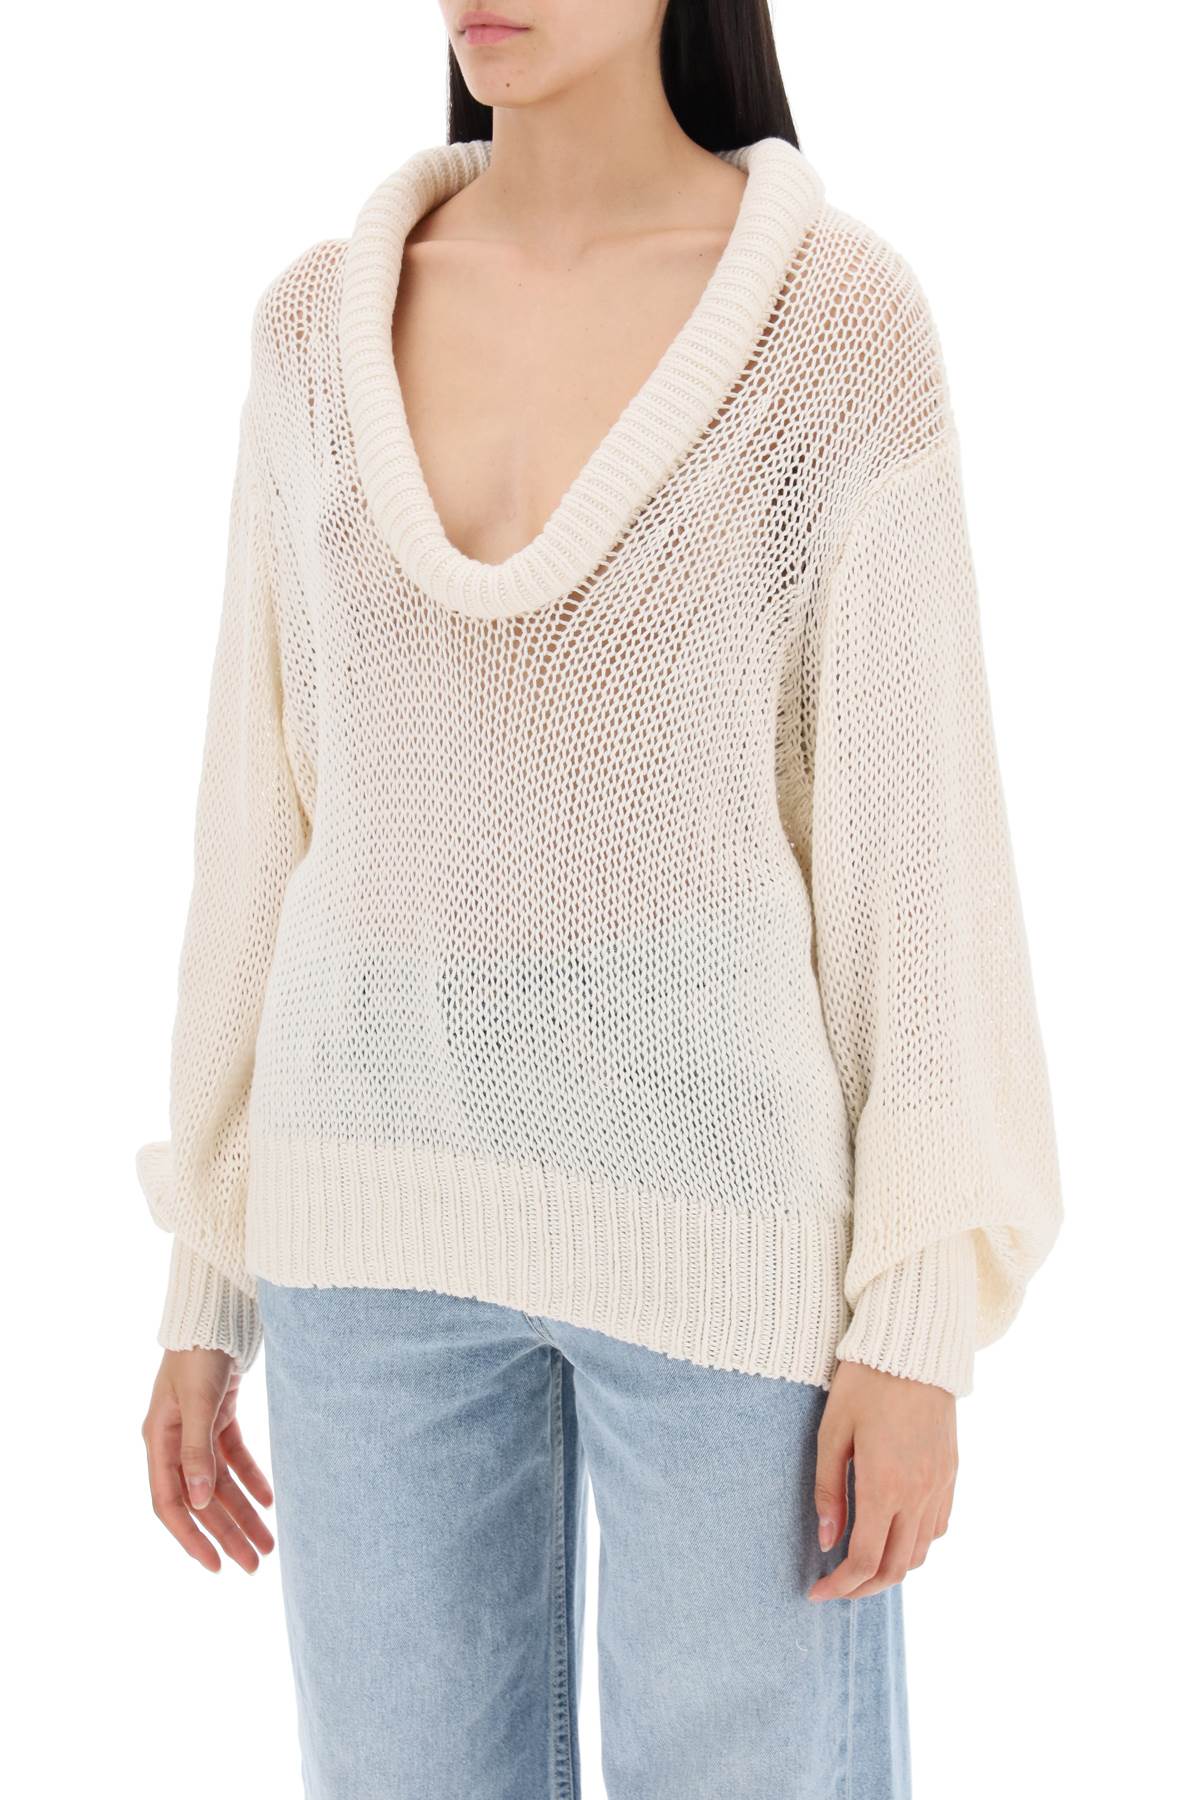 "open-knit bruno pullover-3